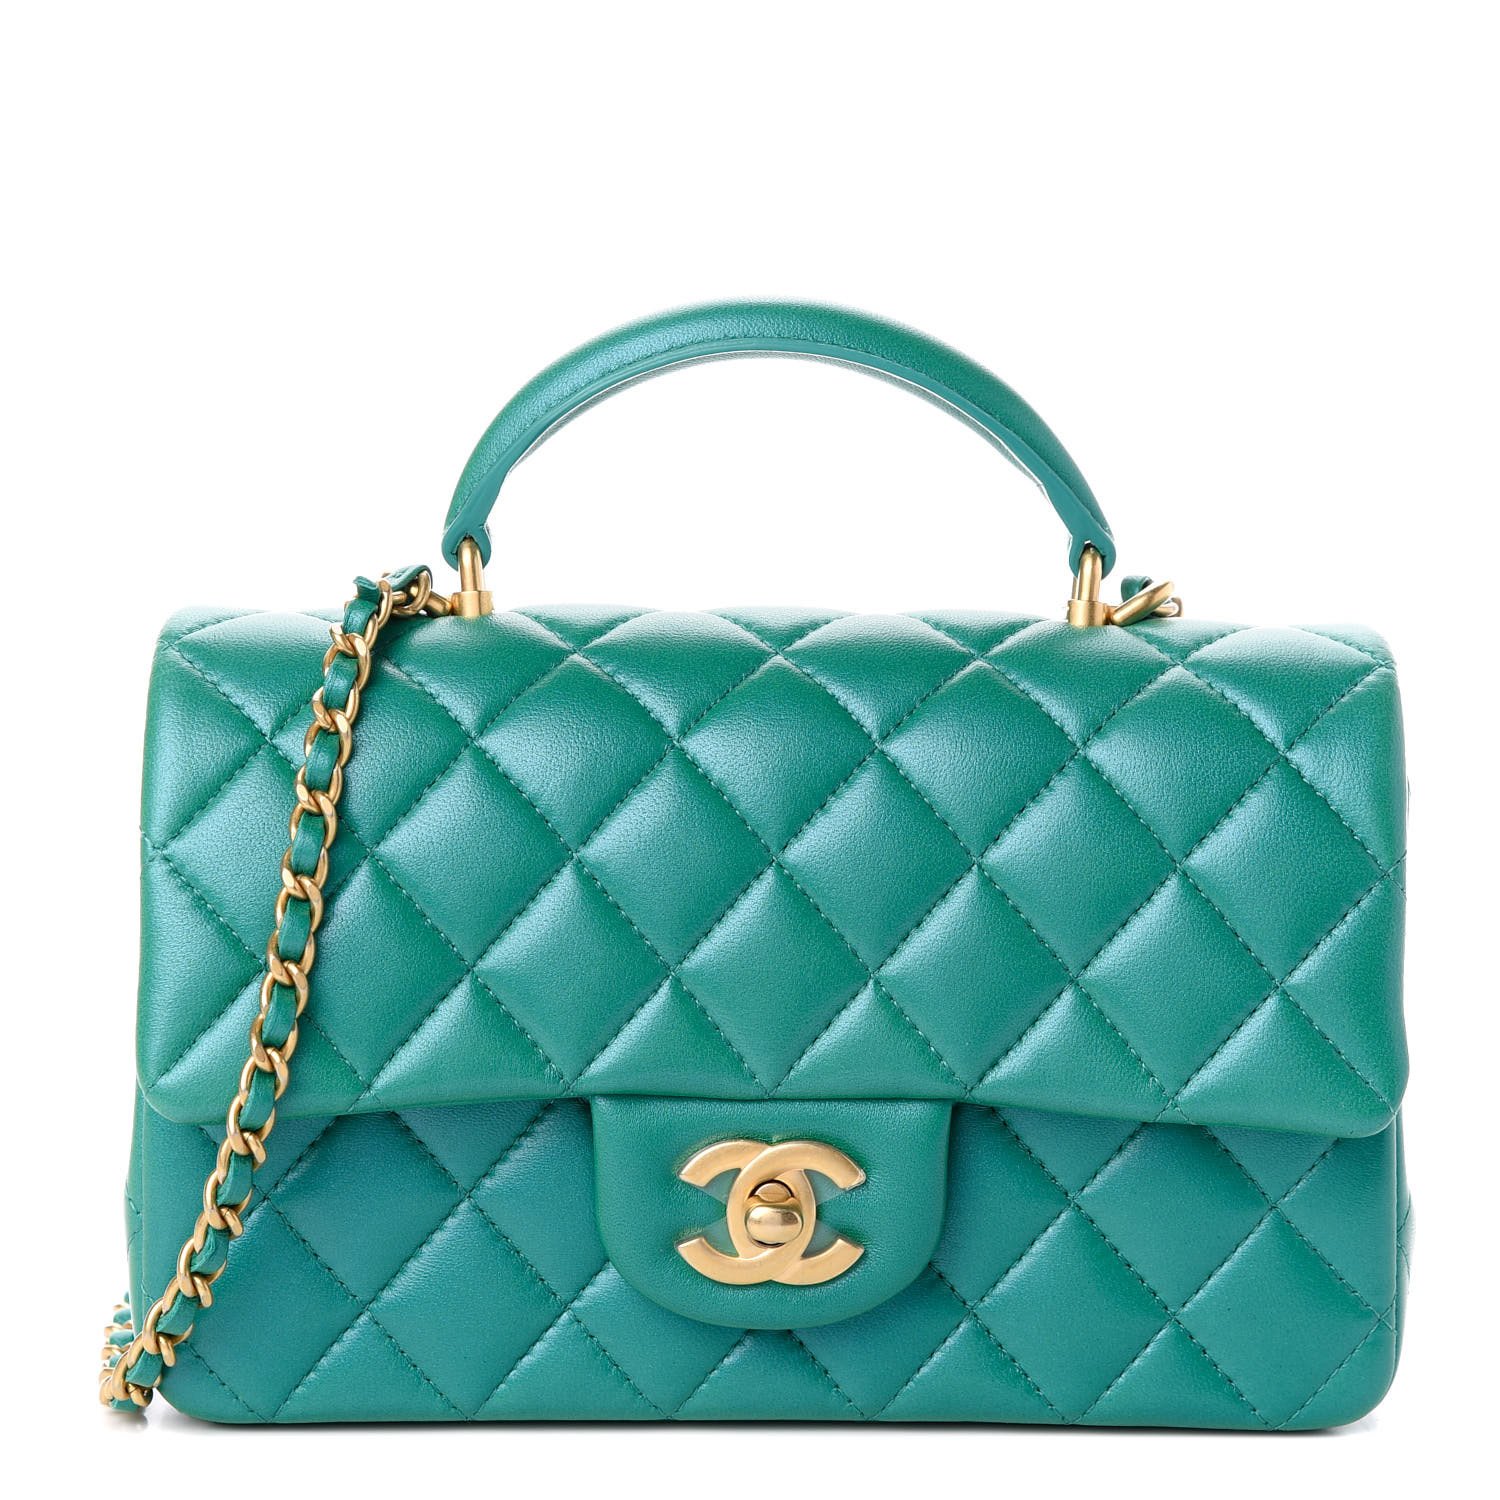 chanel inspired purse